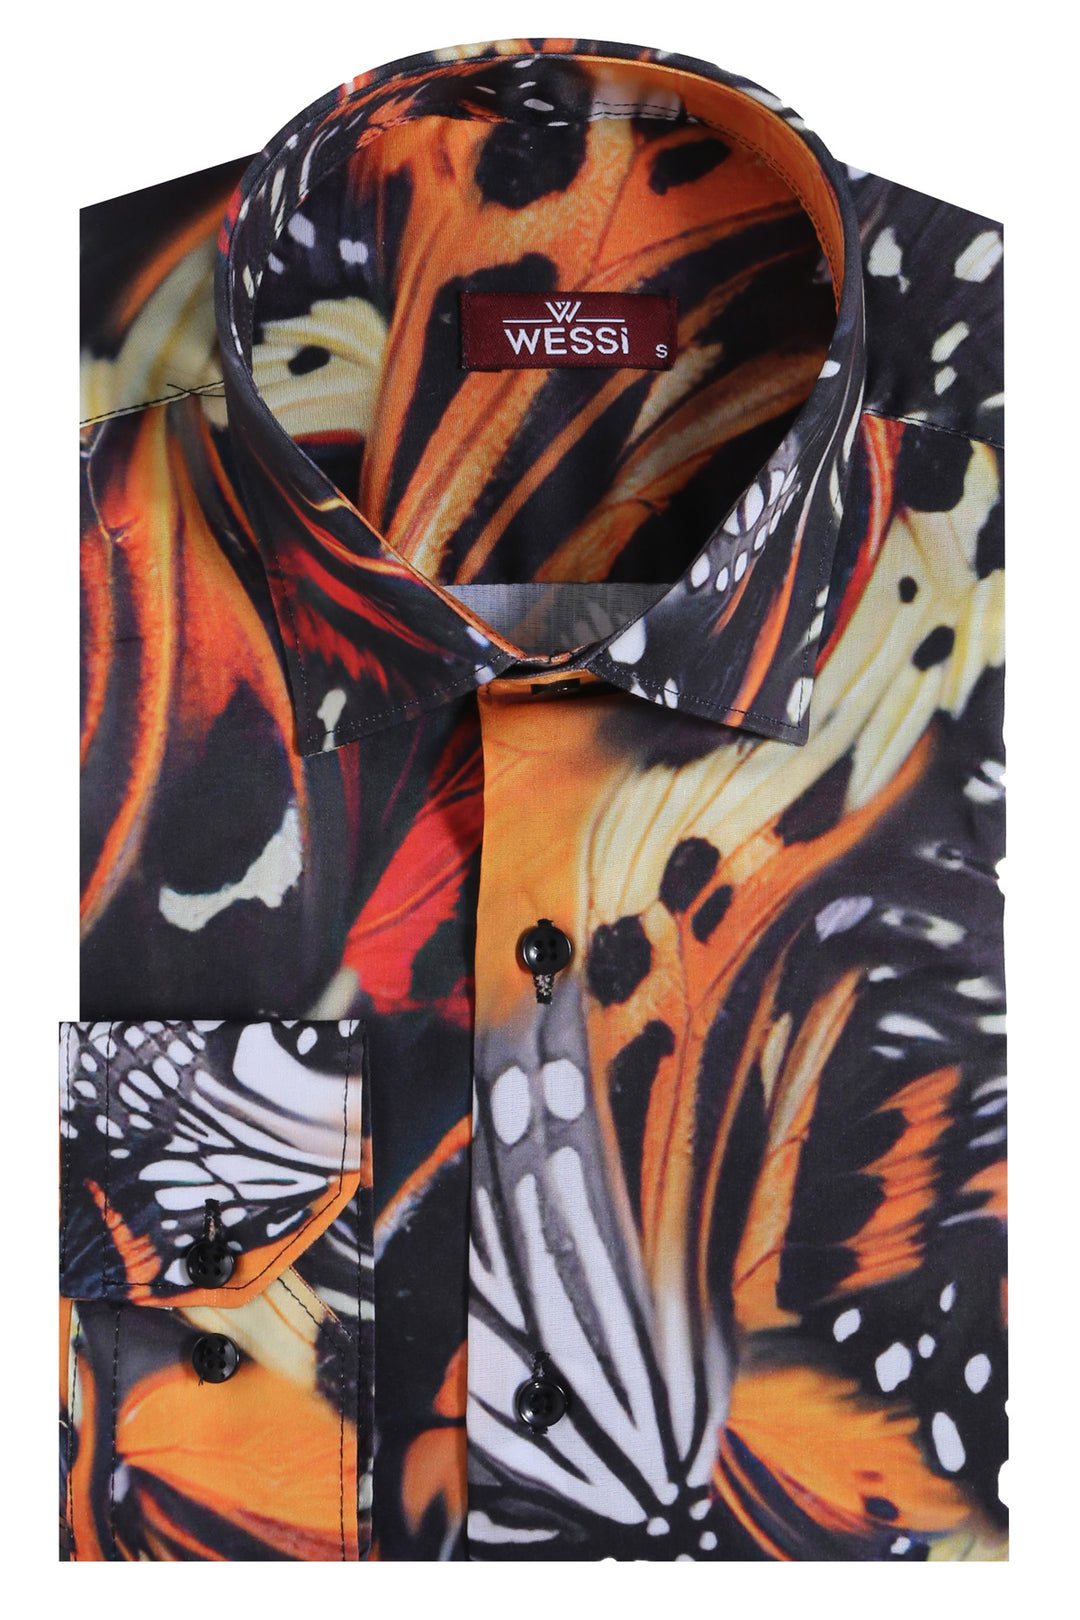 Animal Patterned Long Sleeves Multicolor Men's Shirt - Wessi